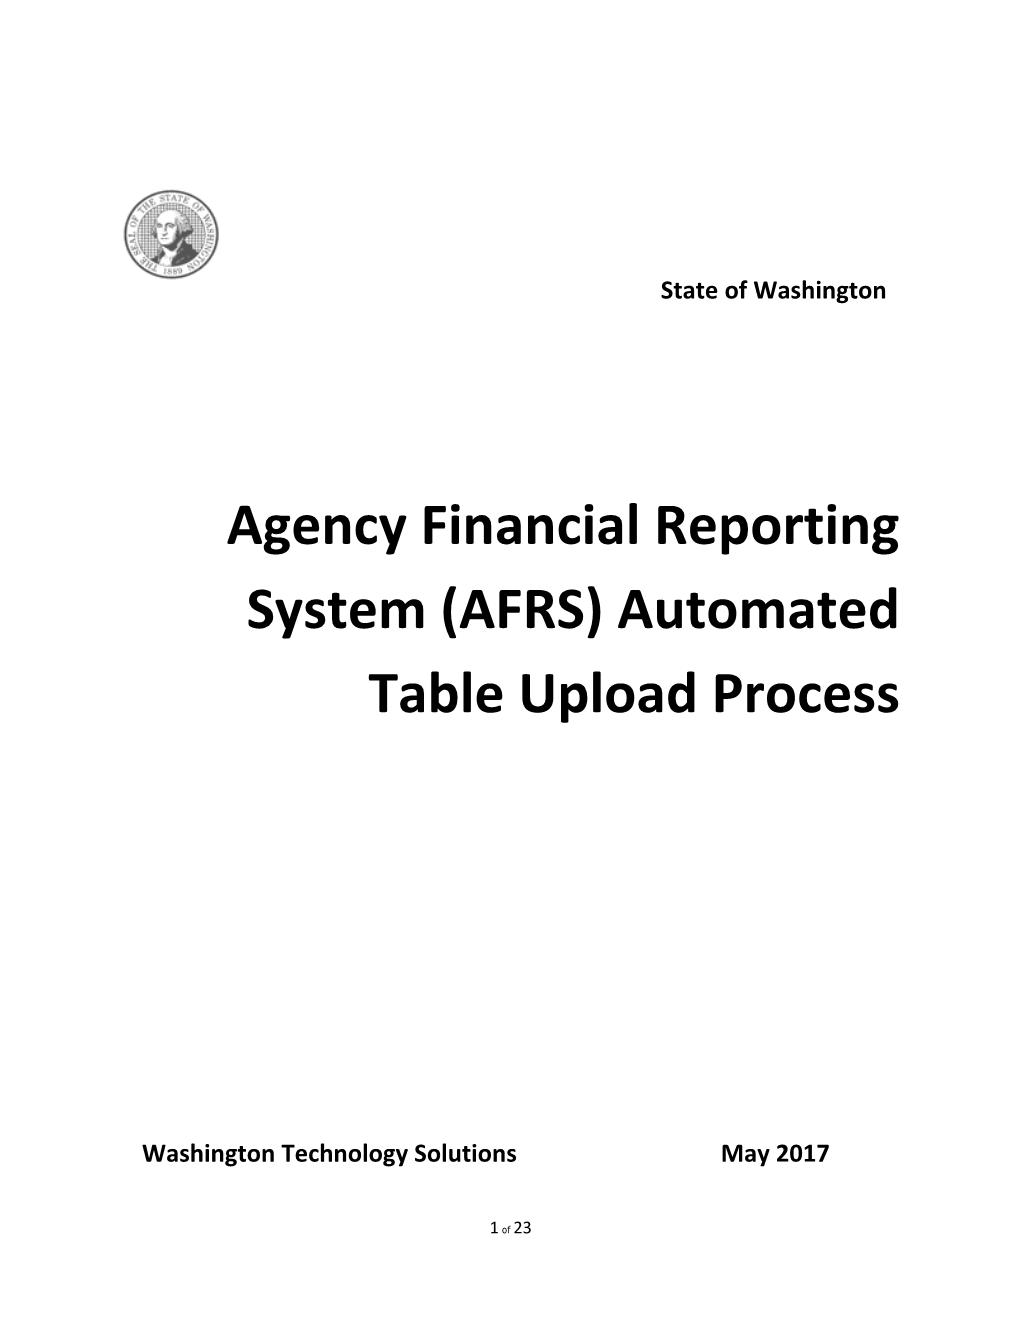 Agency Financial Reporting System (AFRS) Automated Tableupload Process